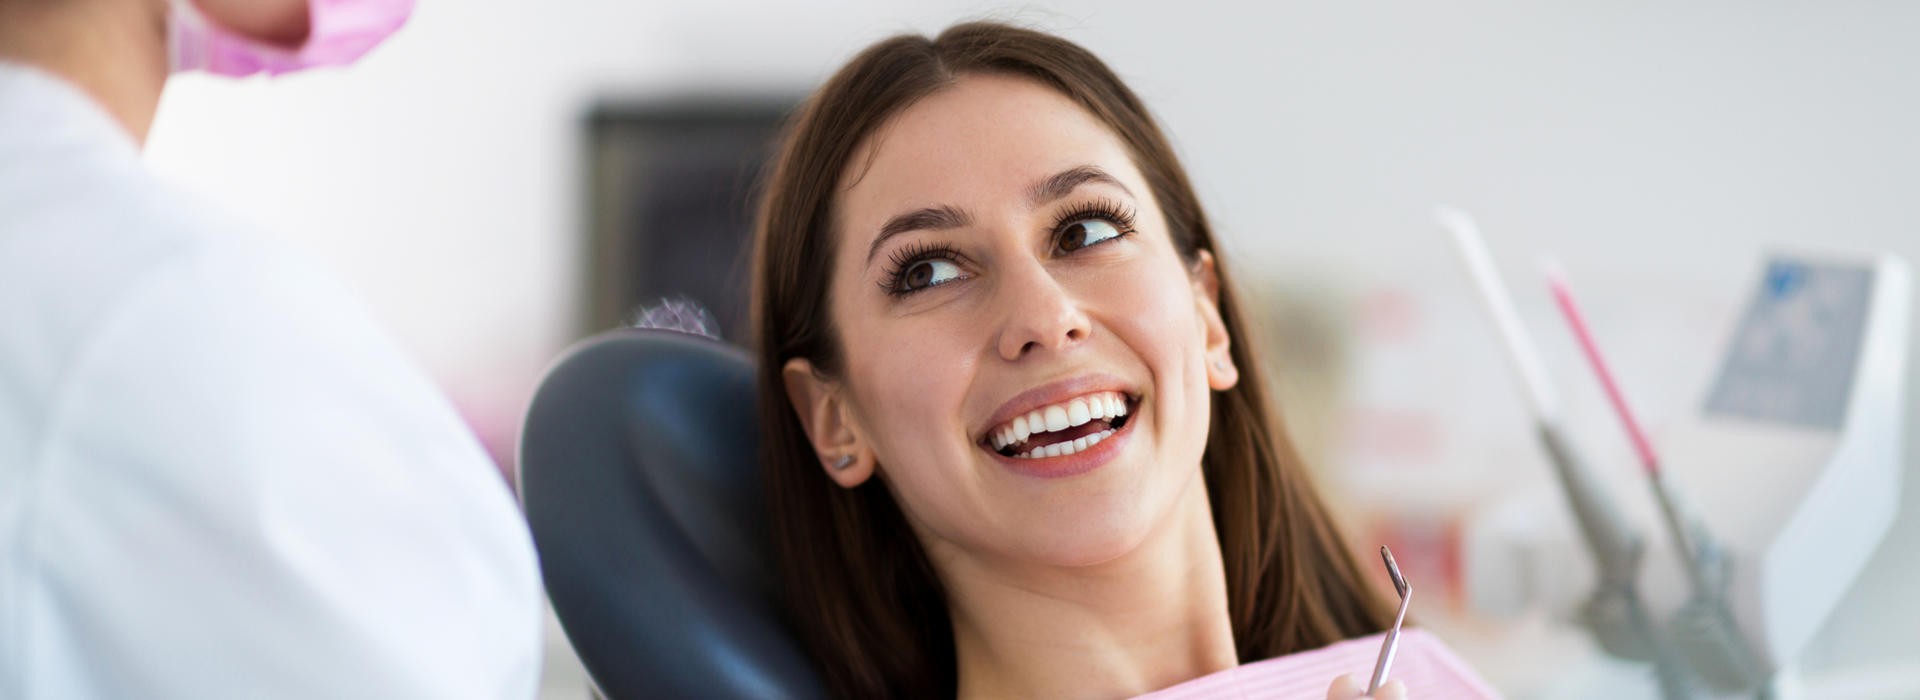 A woman is smiling after dental crowns and bridges.